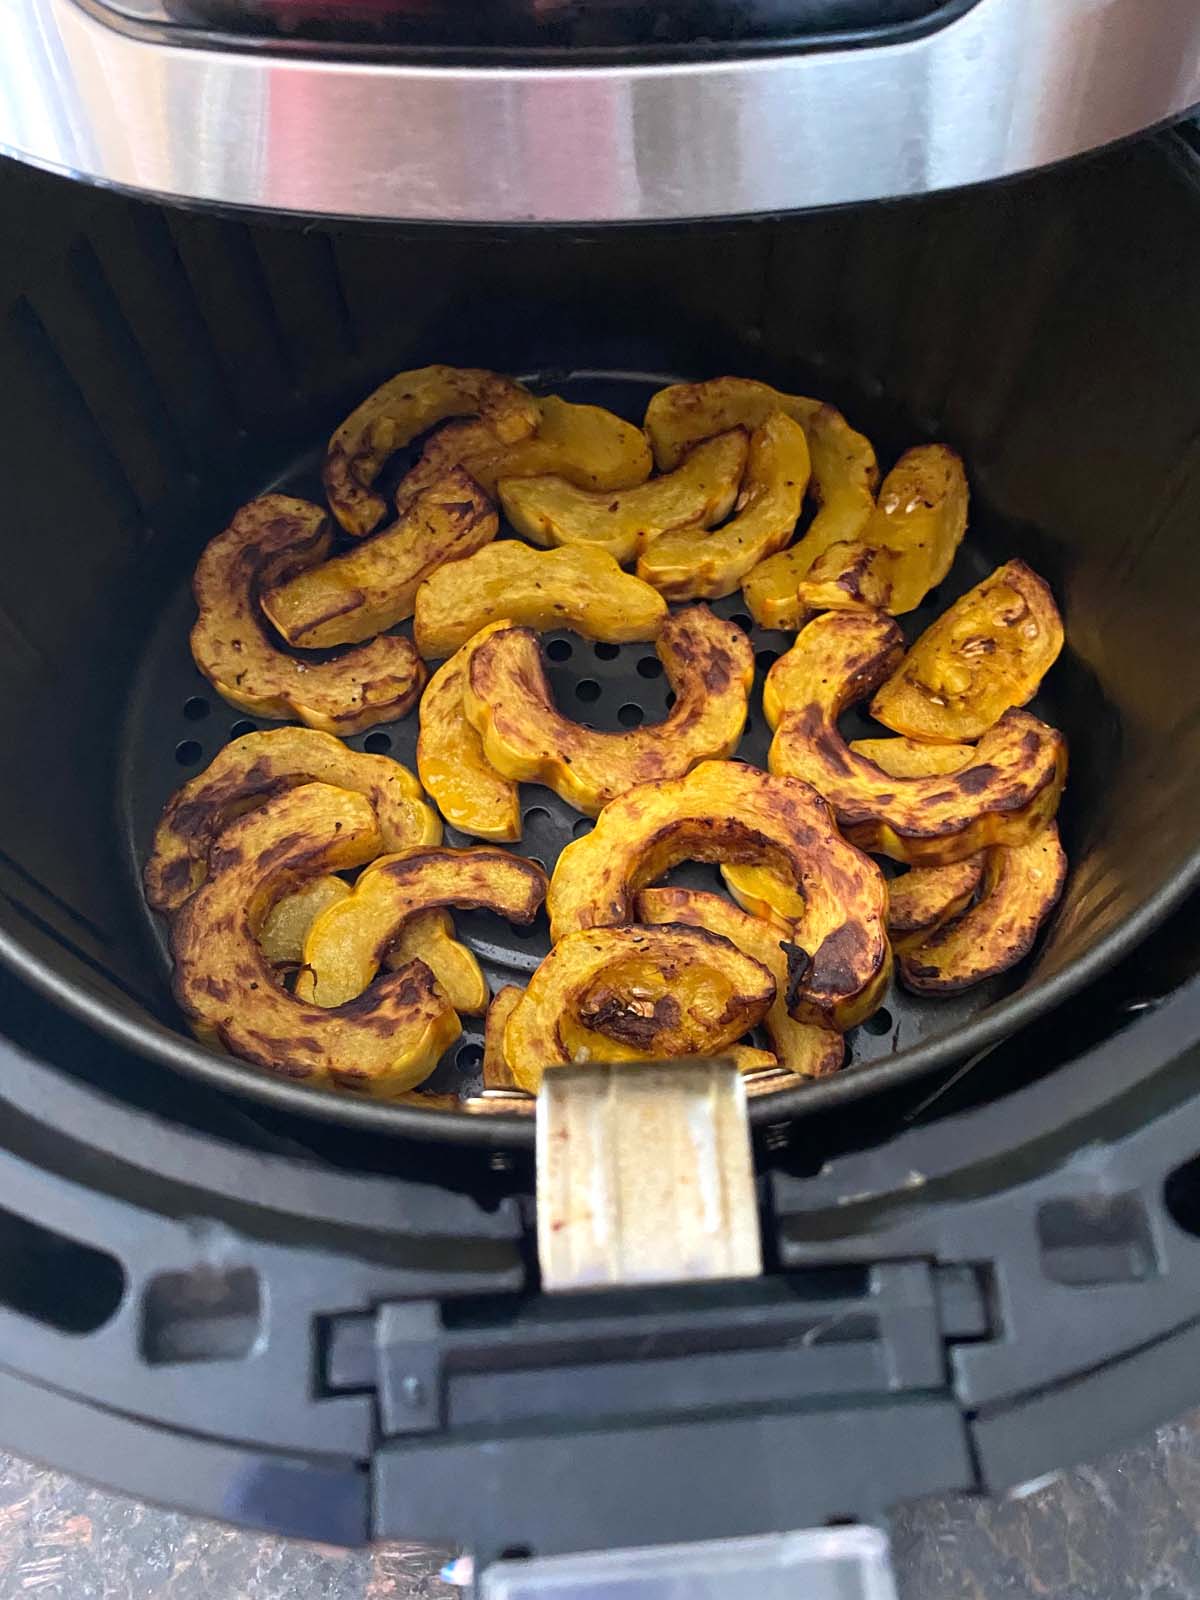 Cooked delicata squash in an air fryer.